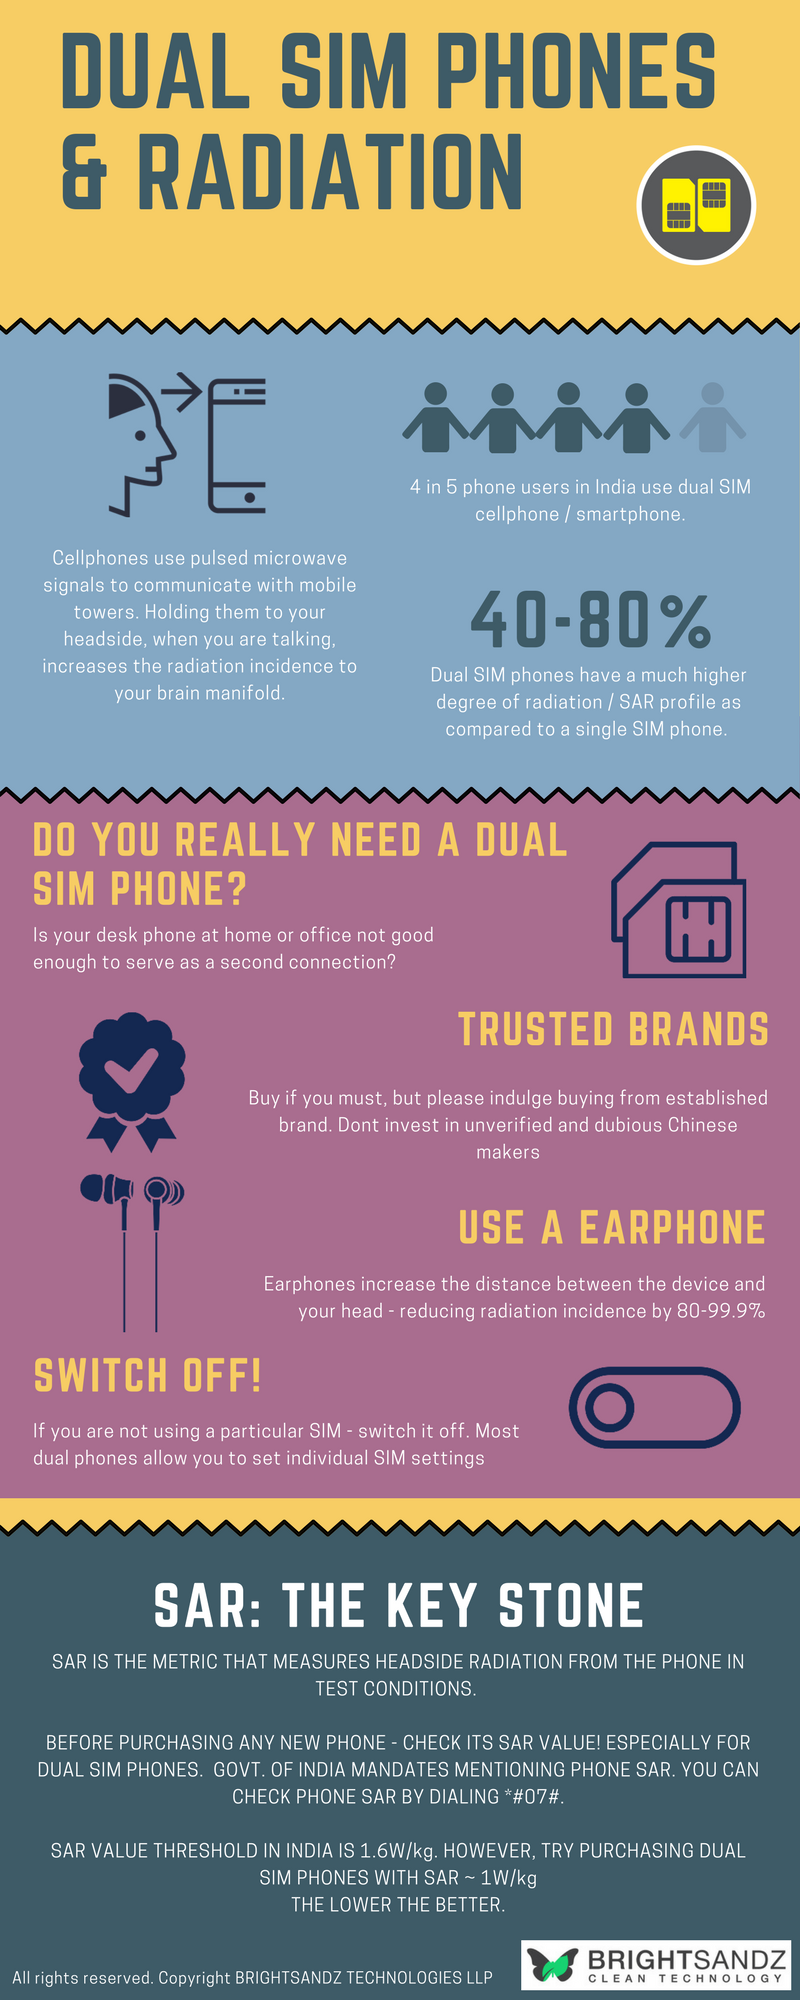 Here's what you should know about dual SIM phone radiation | by Brightsandz  Technologies LLP | Medium